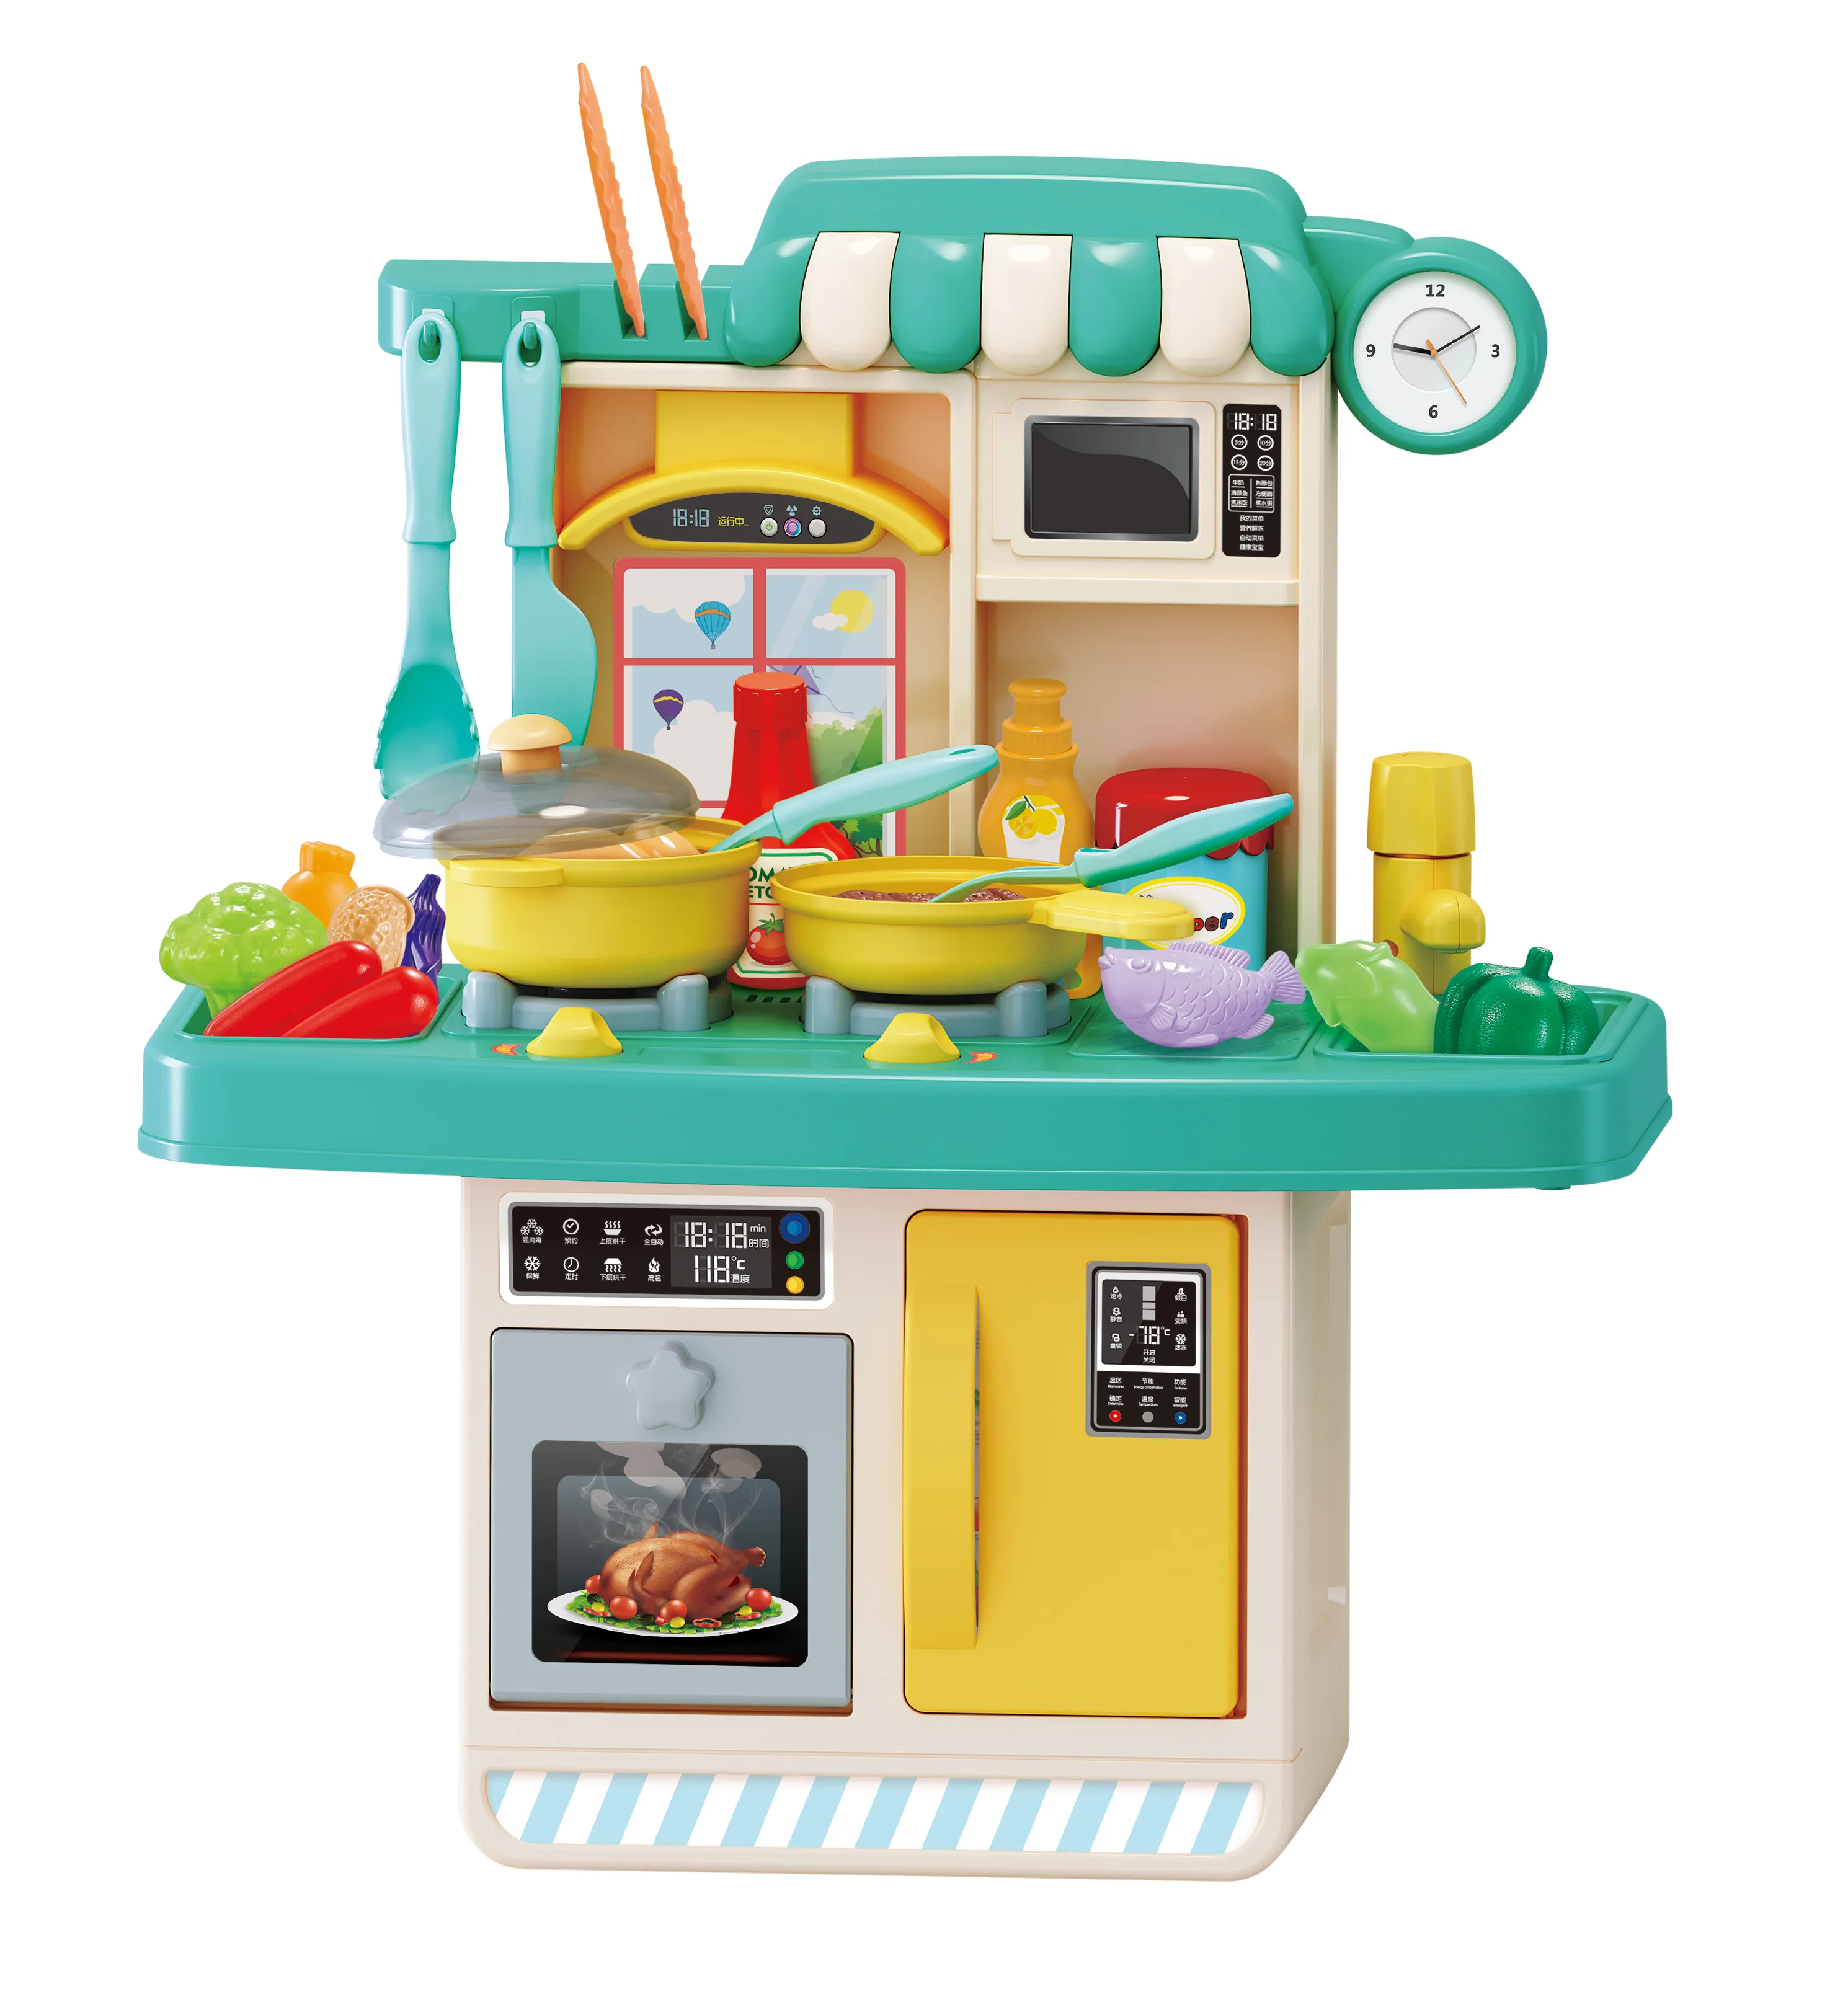 Kitchen Play set 23Pcs role play Kitchen Set Kitchen Toys educational play house toy with Lights and Sounds toys for children